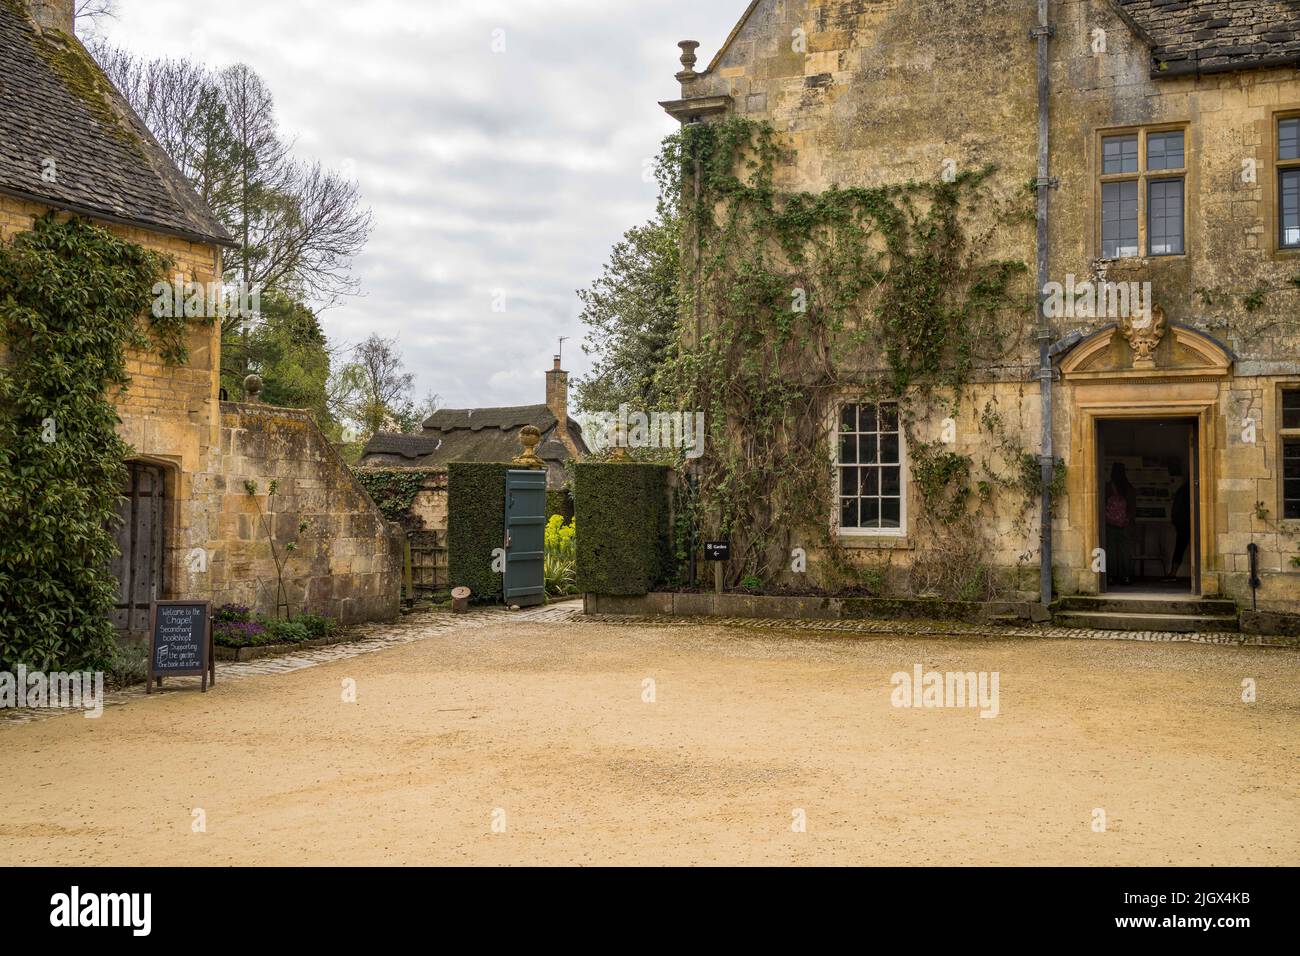 Main HOuse and chapel, Hidcote Manor Estate, early spring, Chipping Campden, Glouscestershire UK Stock Photo